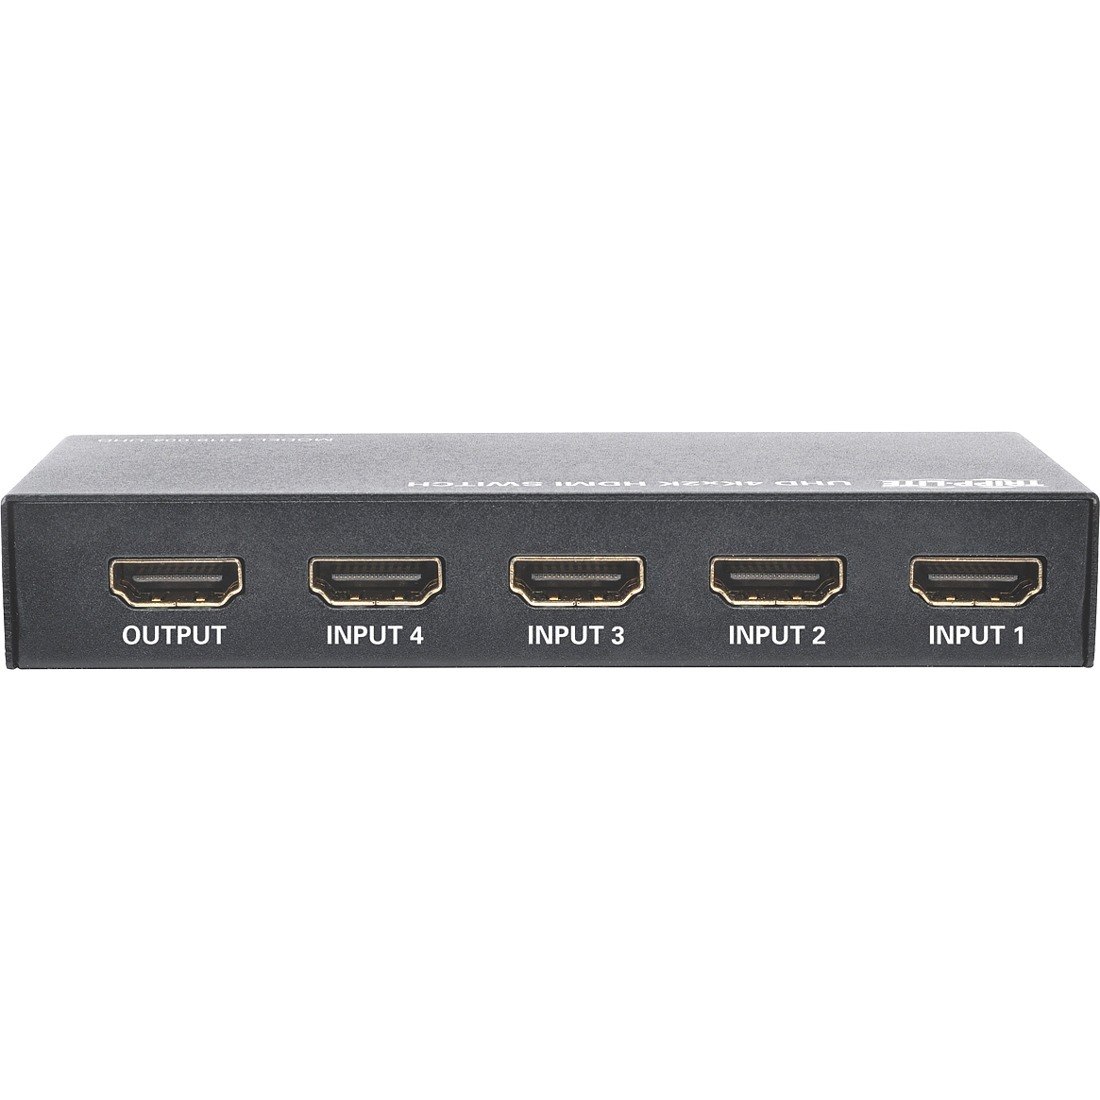 Eaton Tripp Lite Series 4-Port HDMI Switch with Remote Control - 4K 60 Hz, UHD, 4:4:4, HDR, 3D